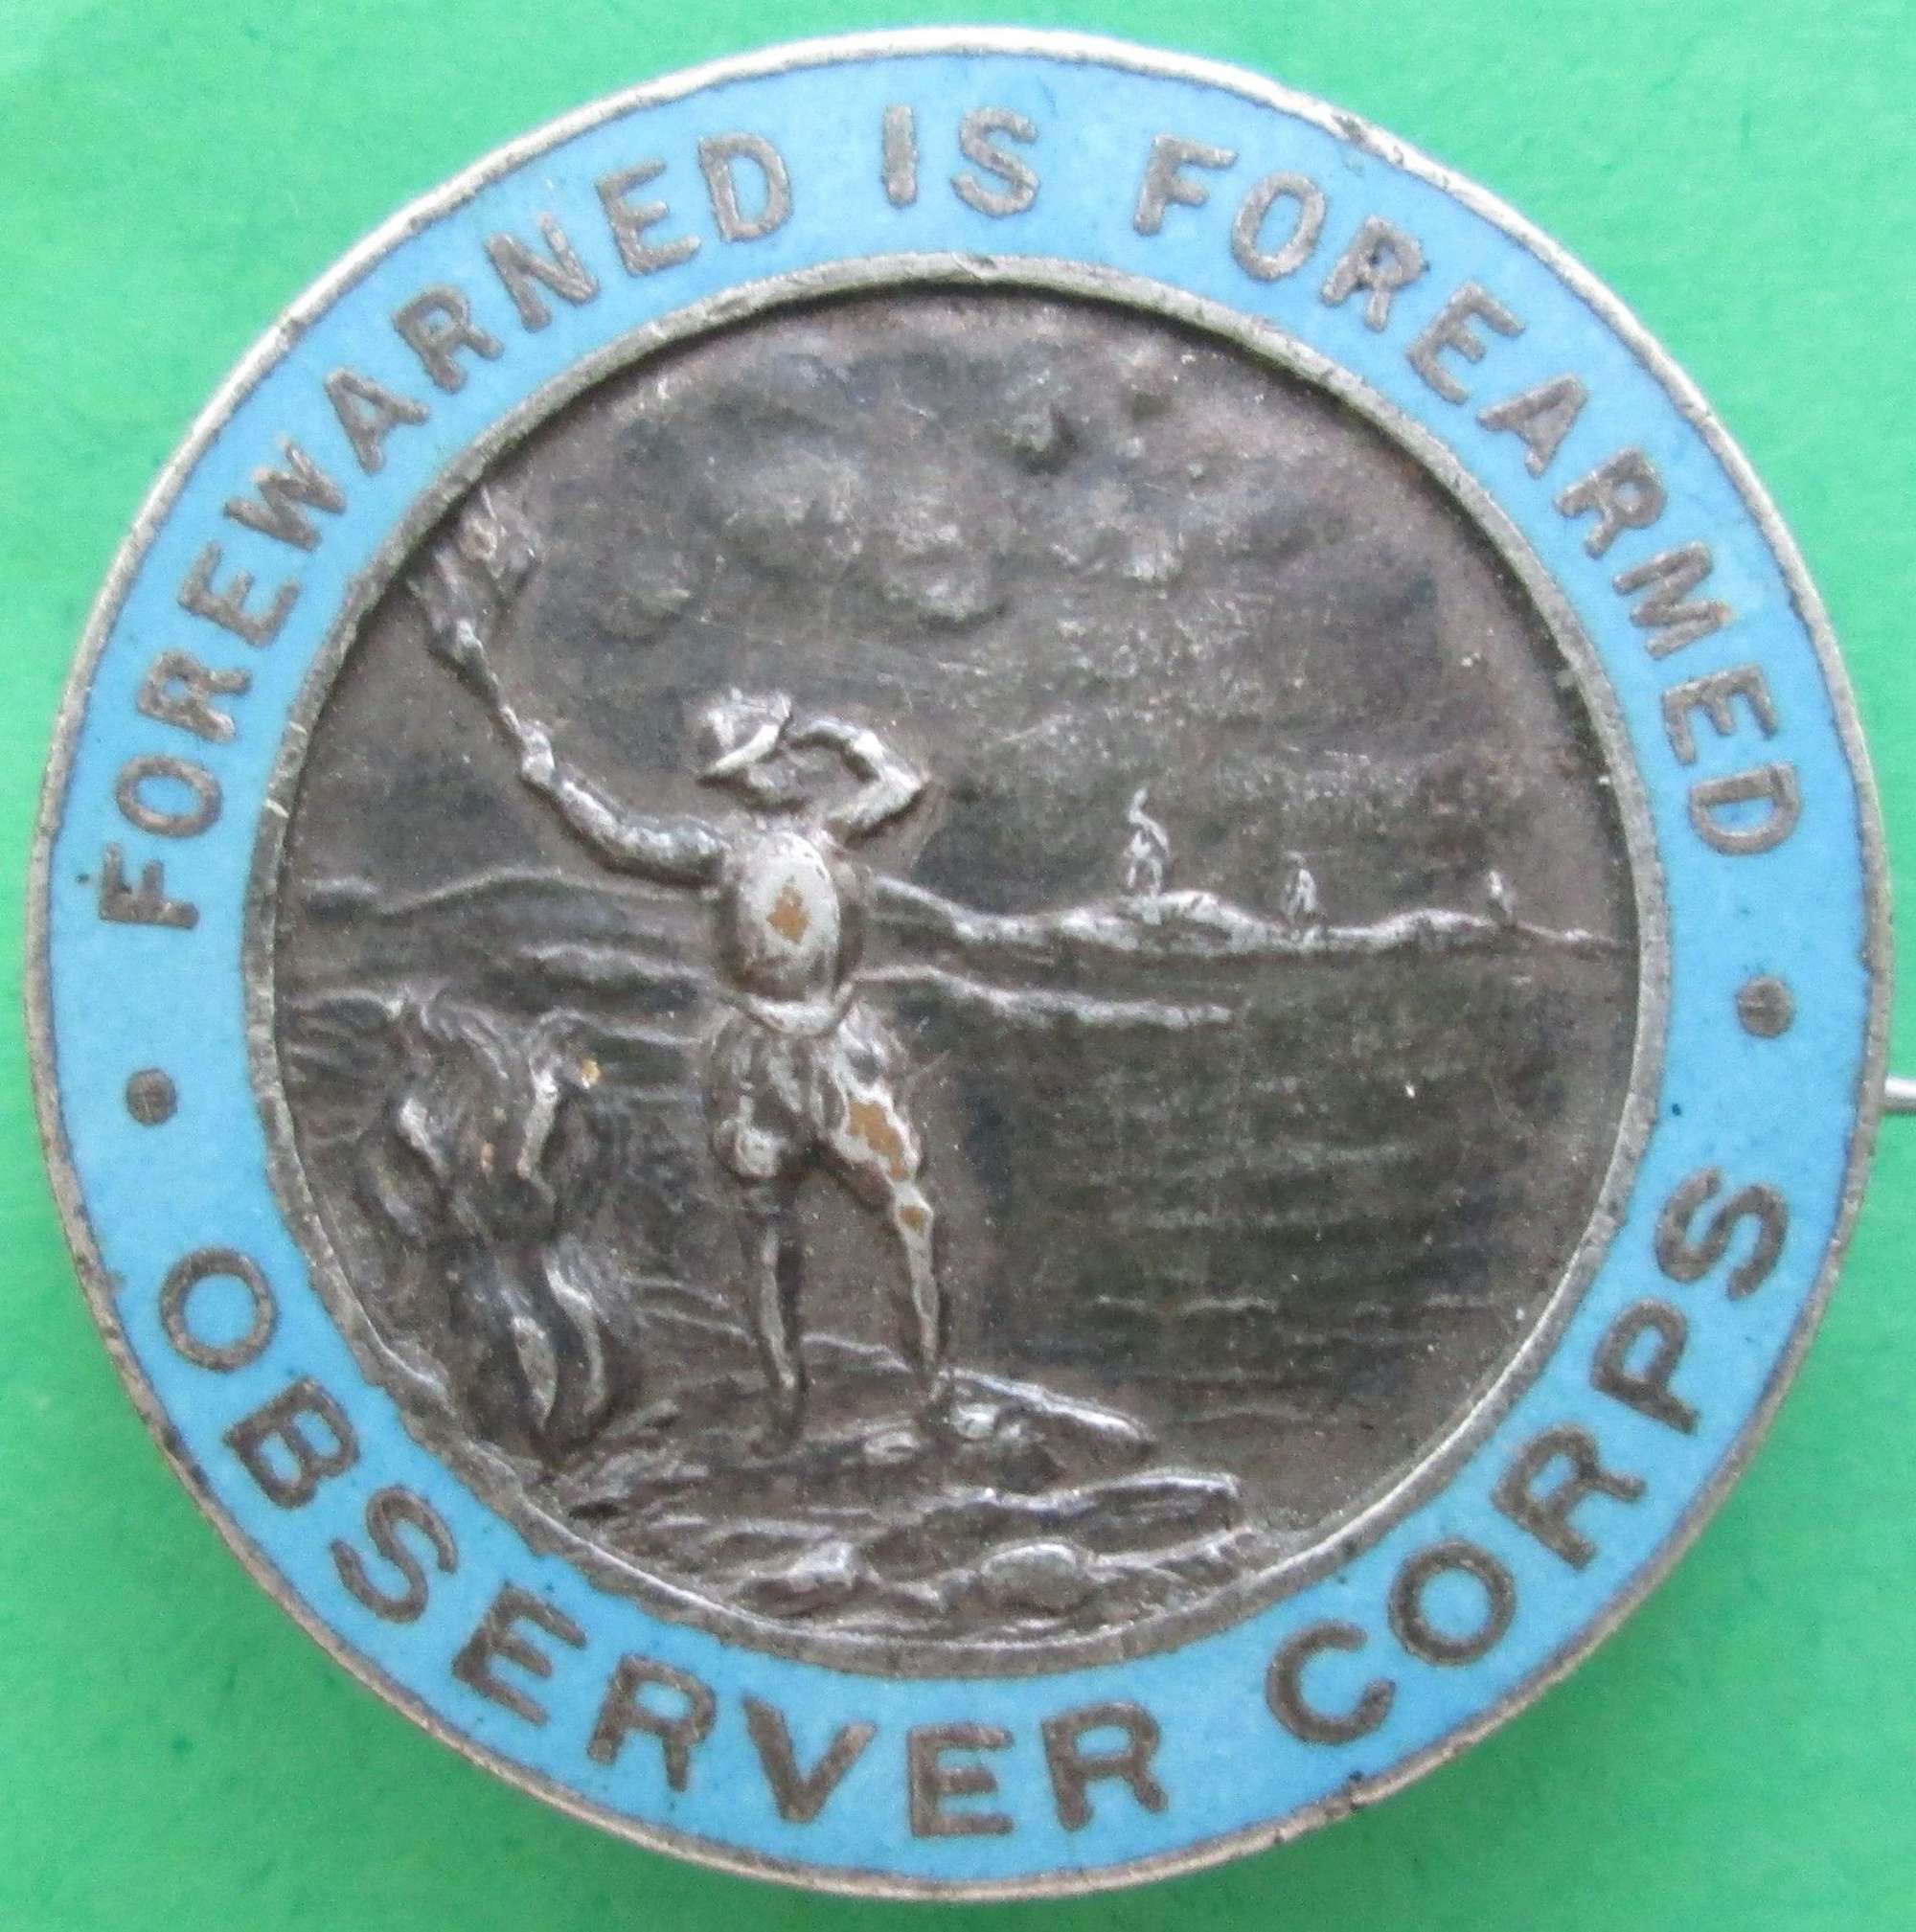 AN OBSERVER CORPS PIN BADGE